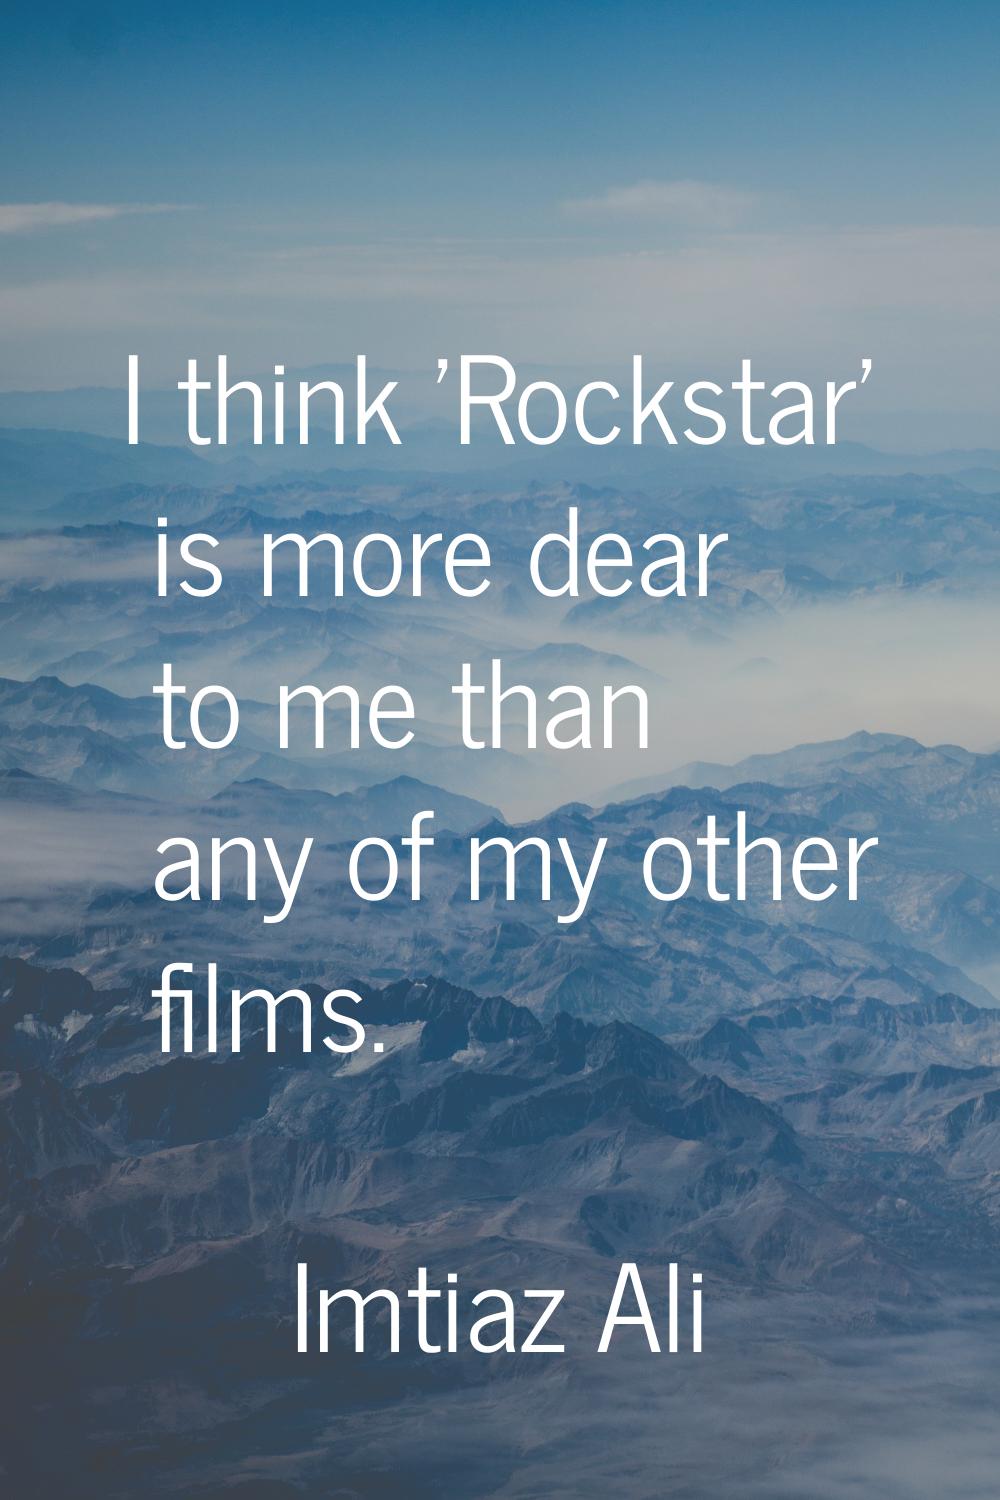 I think 'Rockstar' is more dear to me than any of my other films.